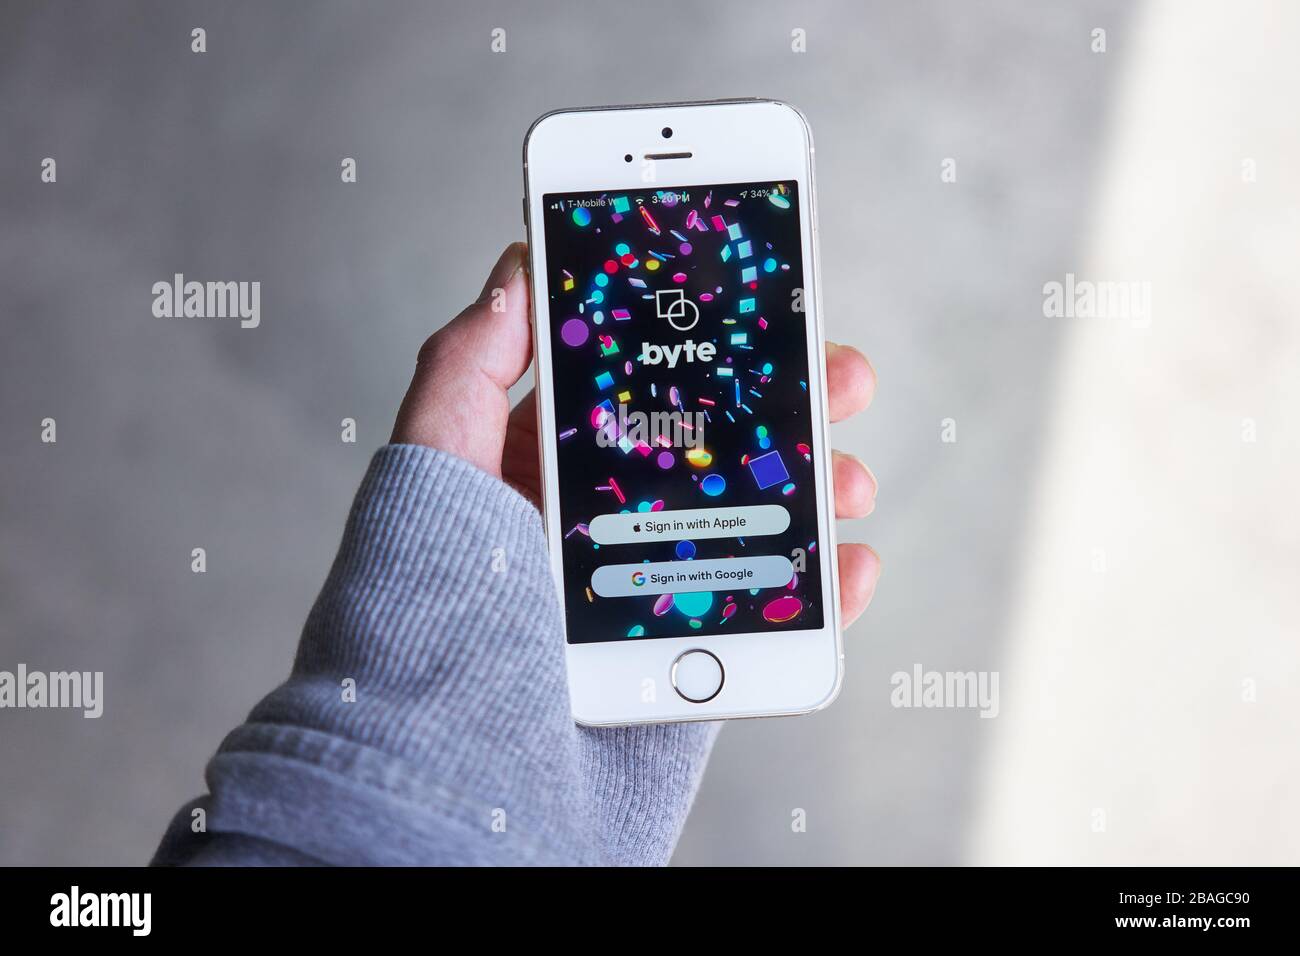 Vine successor Byte's mobile app sign in screen is seen on a smartphone. The app lets users shoot and upload six-second looping videos. Stock Photo